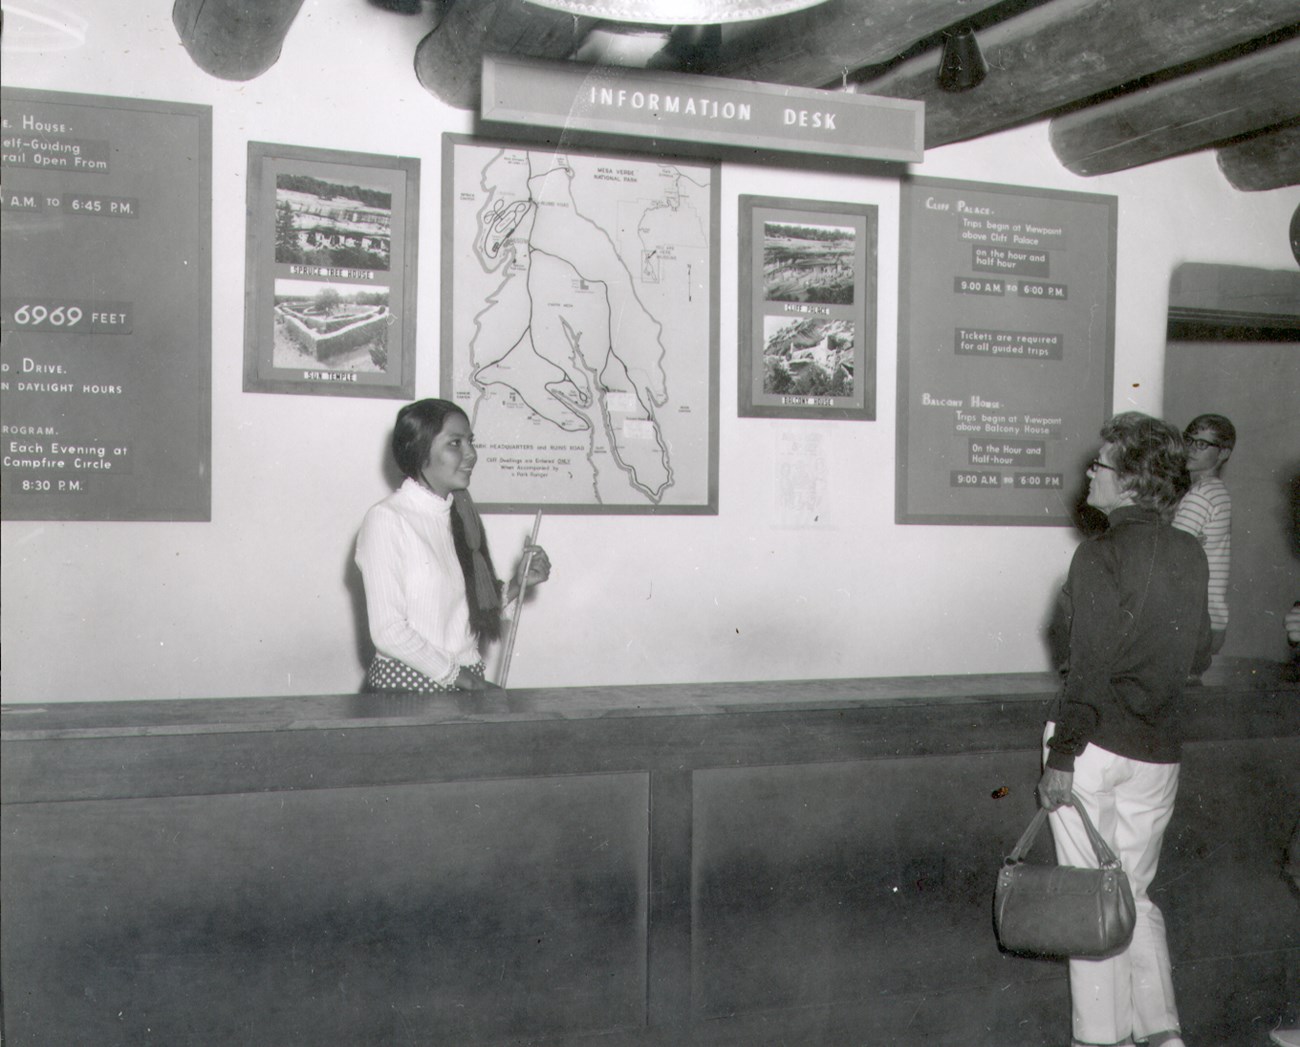 A young woman smiles at a park visitor from behind the museum information desk with maps and tour information posted on the wall